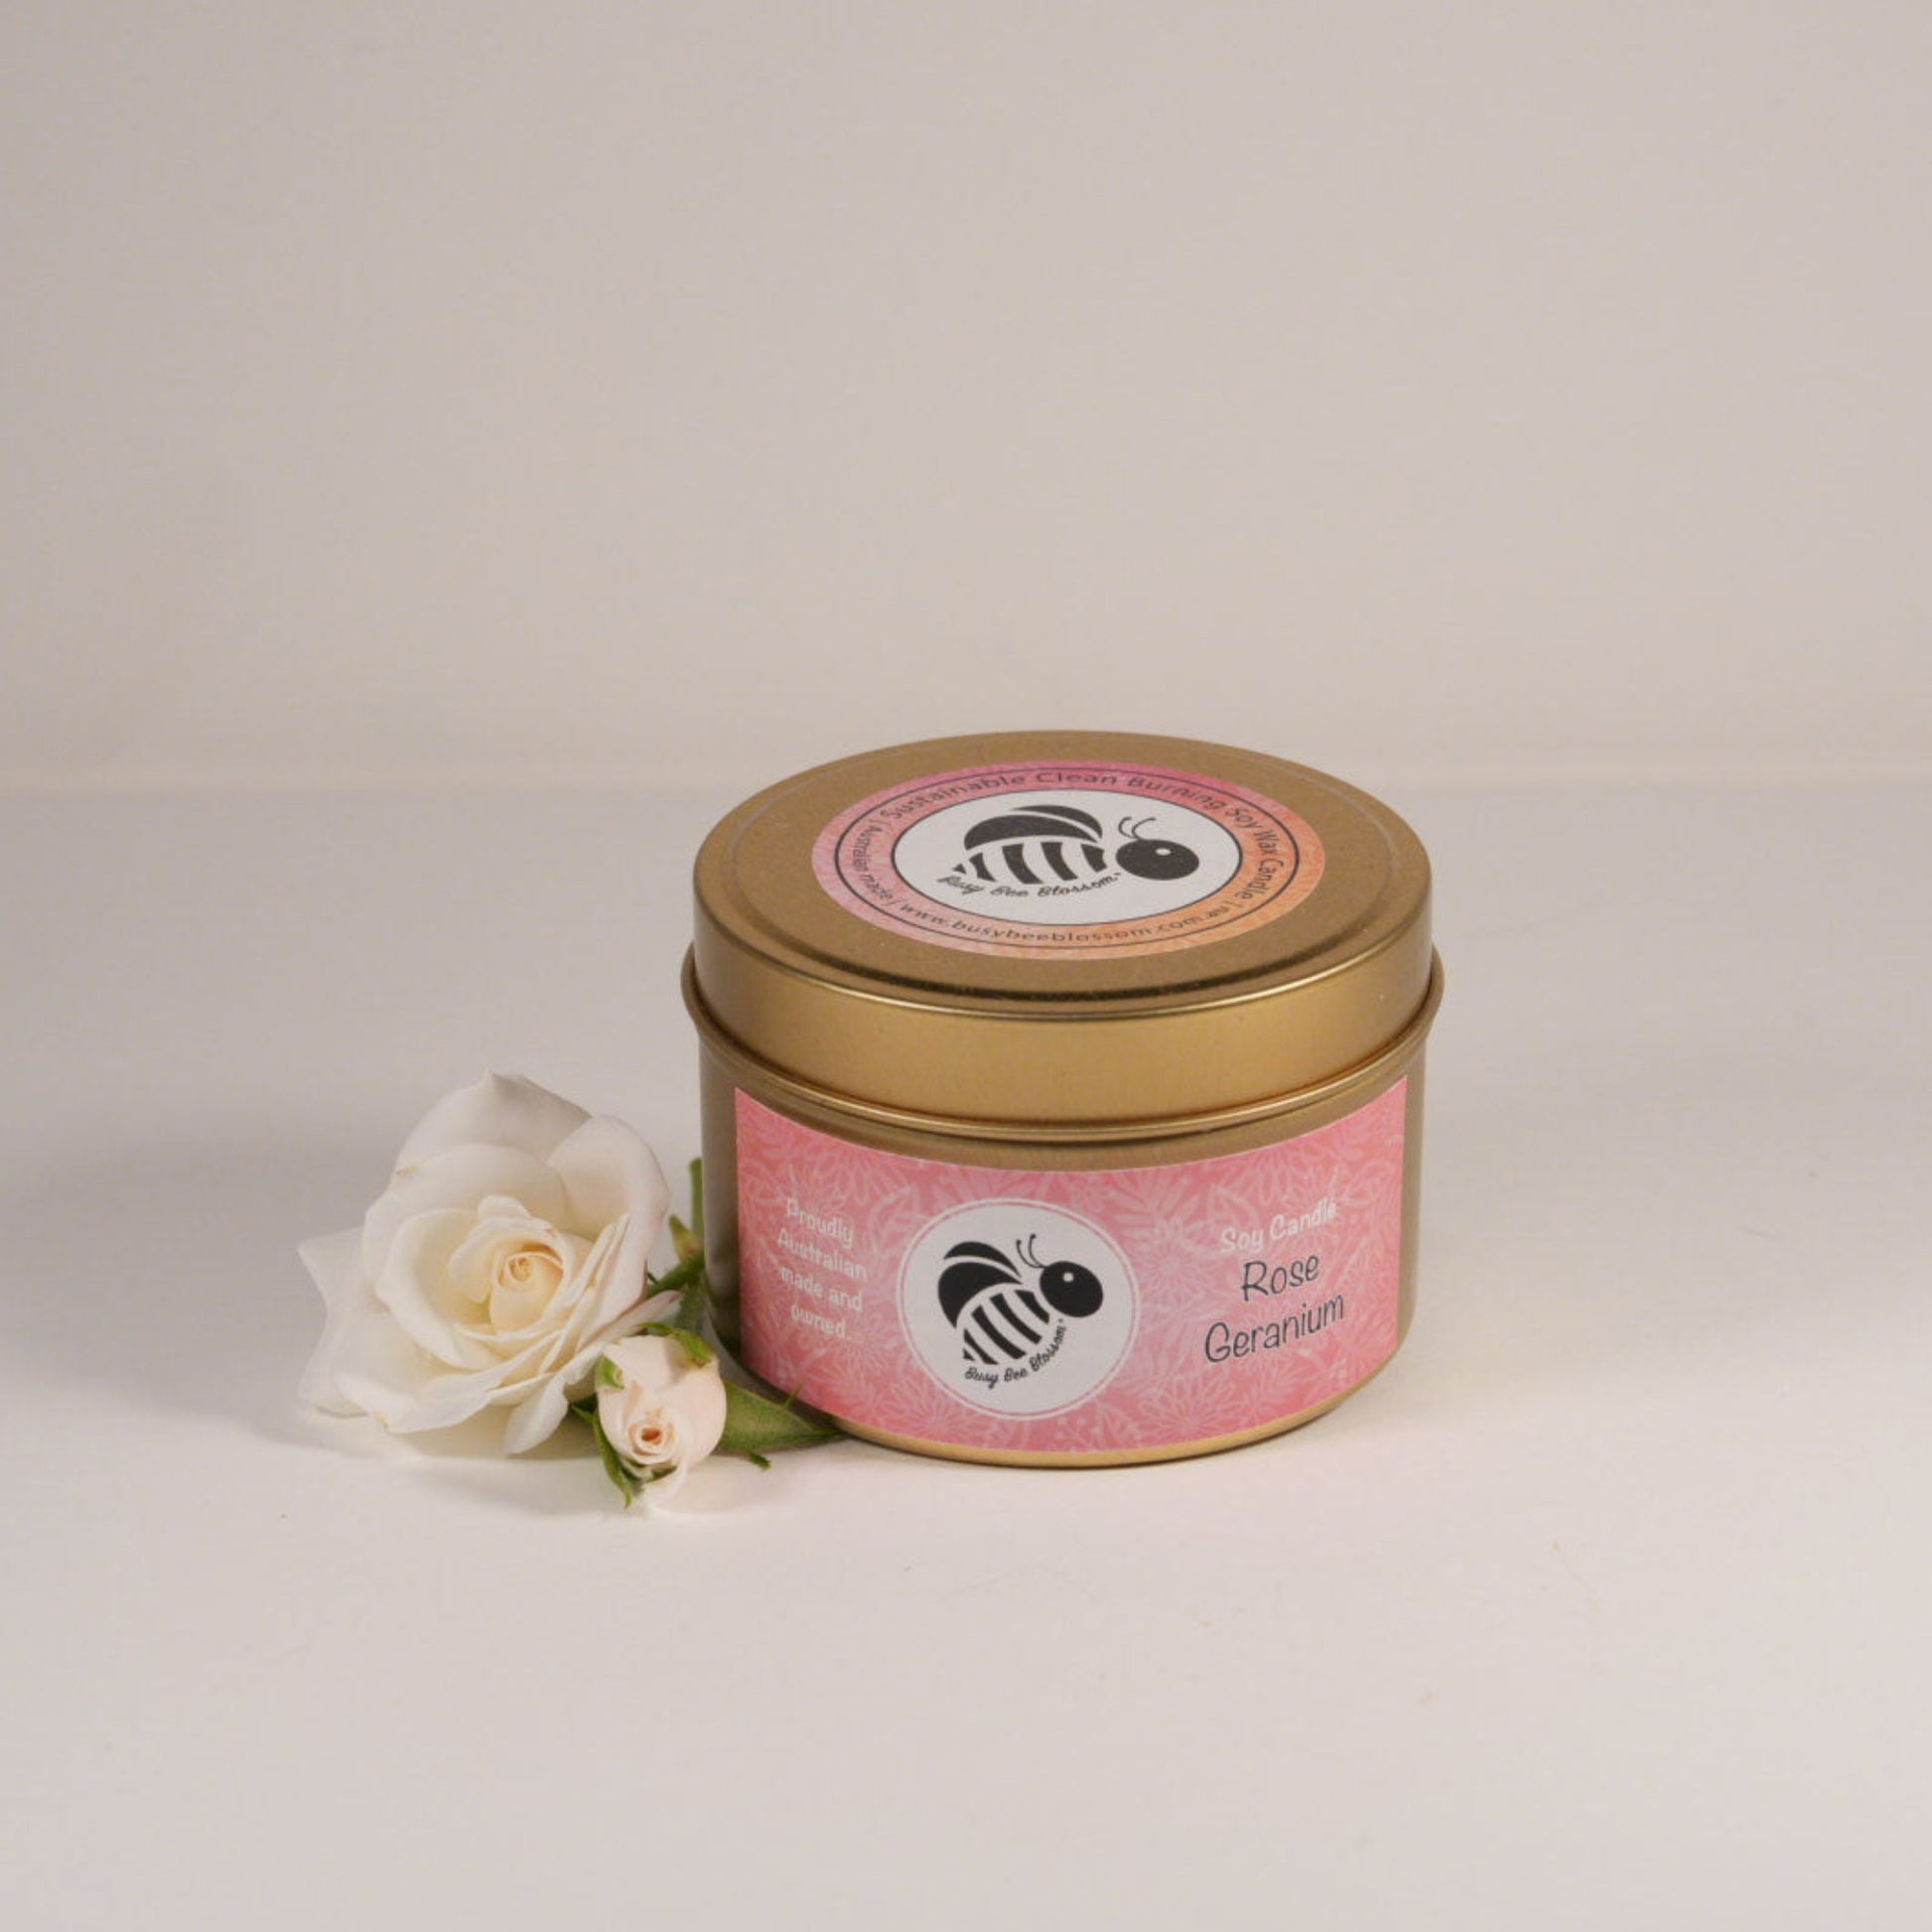 Rose Geranium Gold Travel Tin Soy Candle with roses